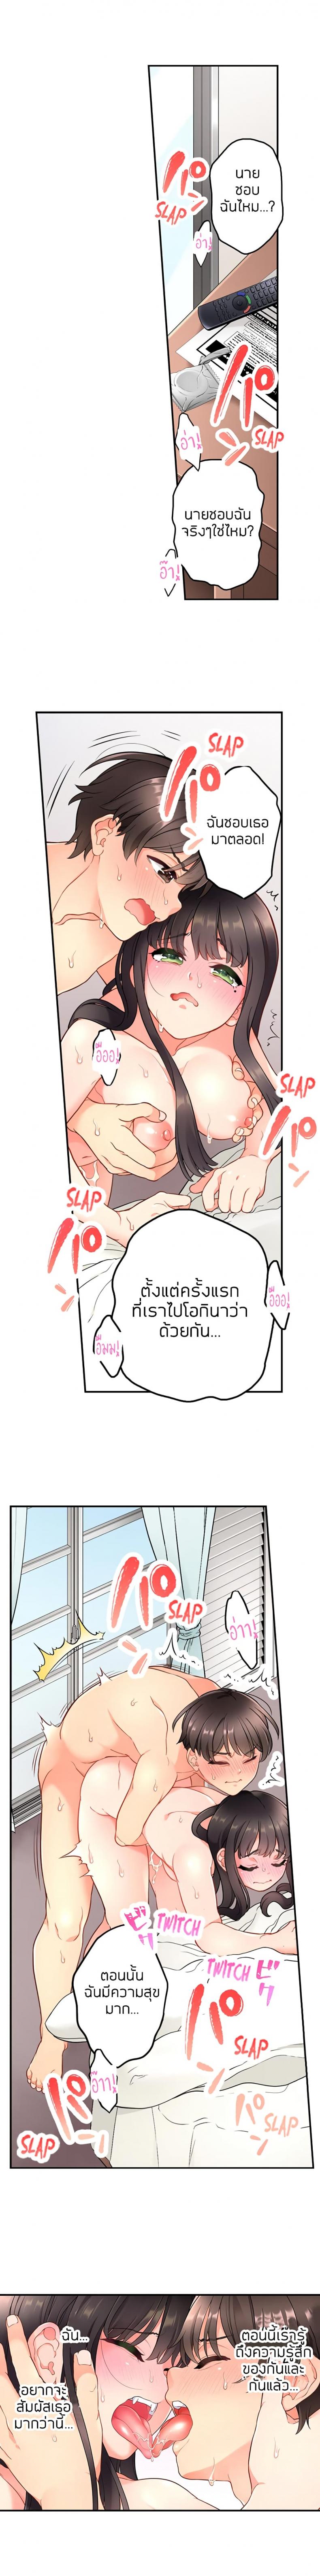 My Friend Came Back From the Future to Fuck Me 24 ภาพที่ 6